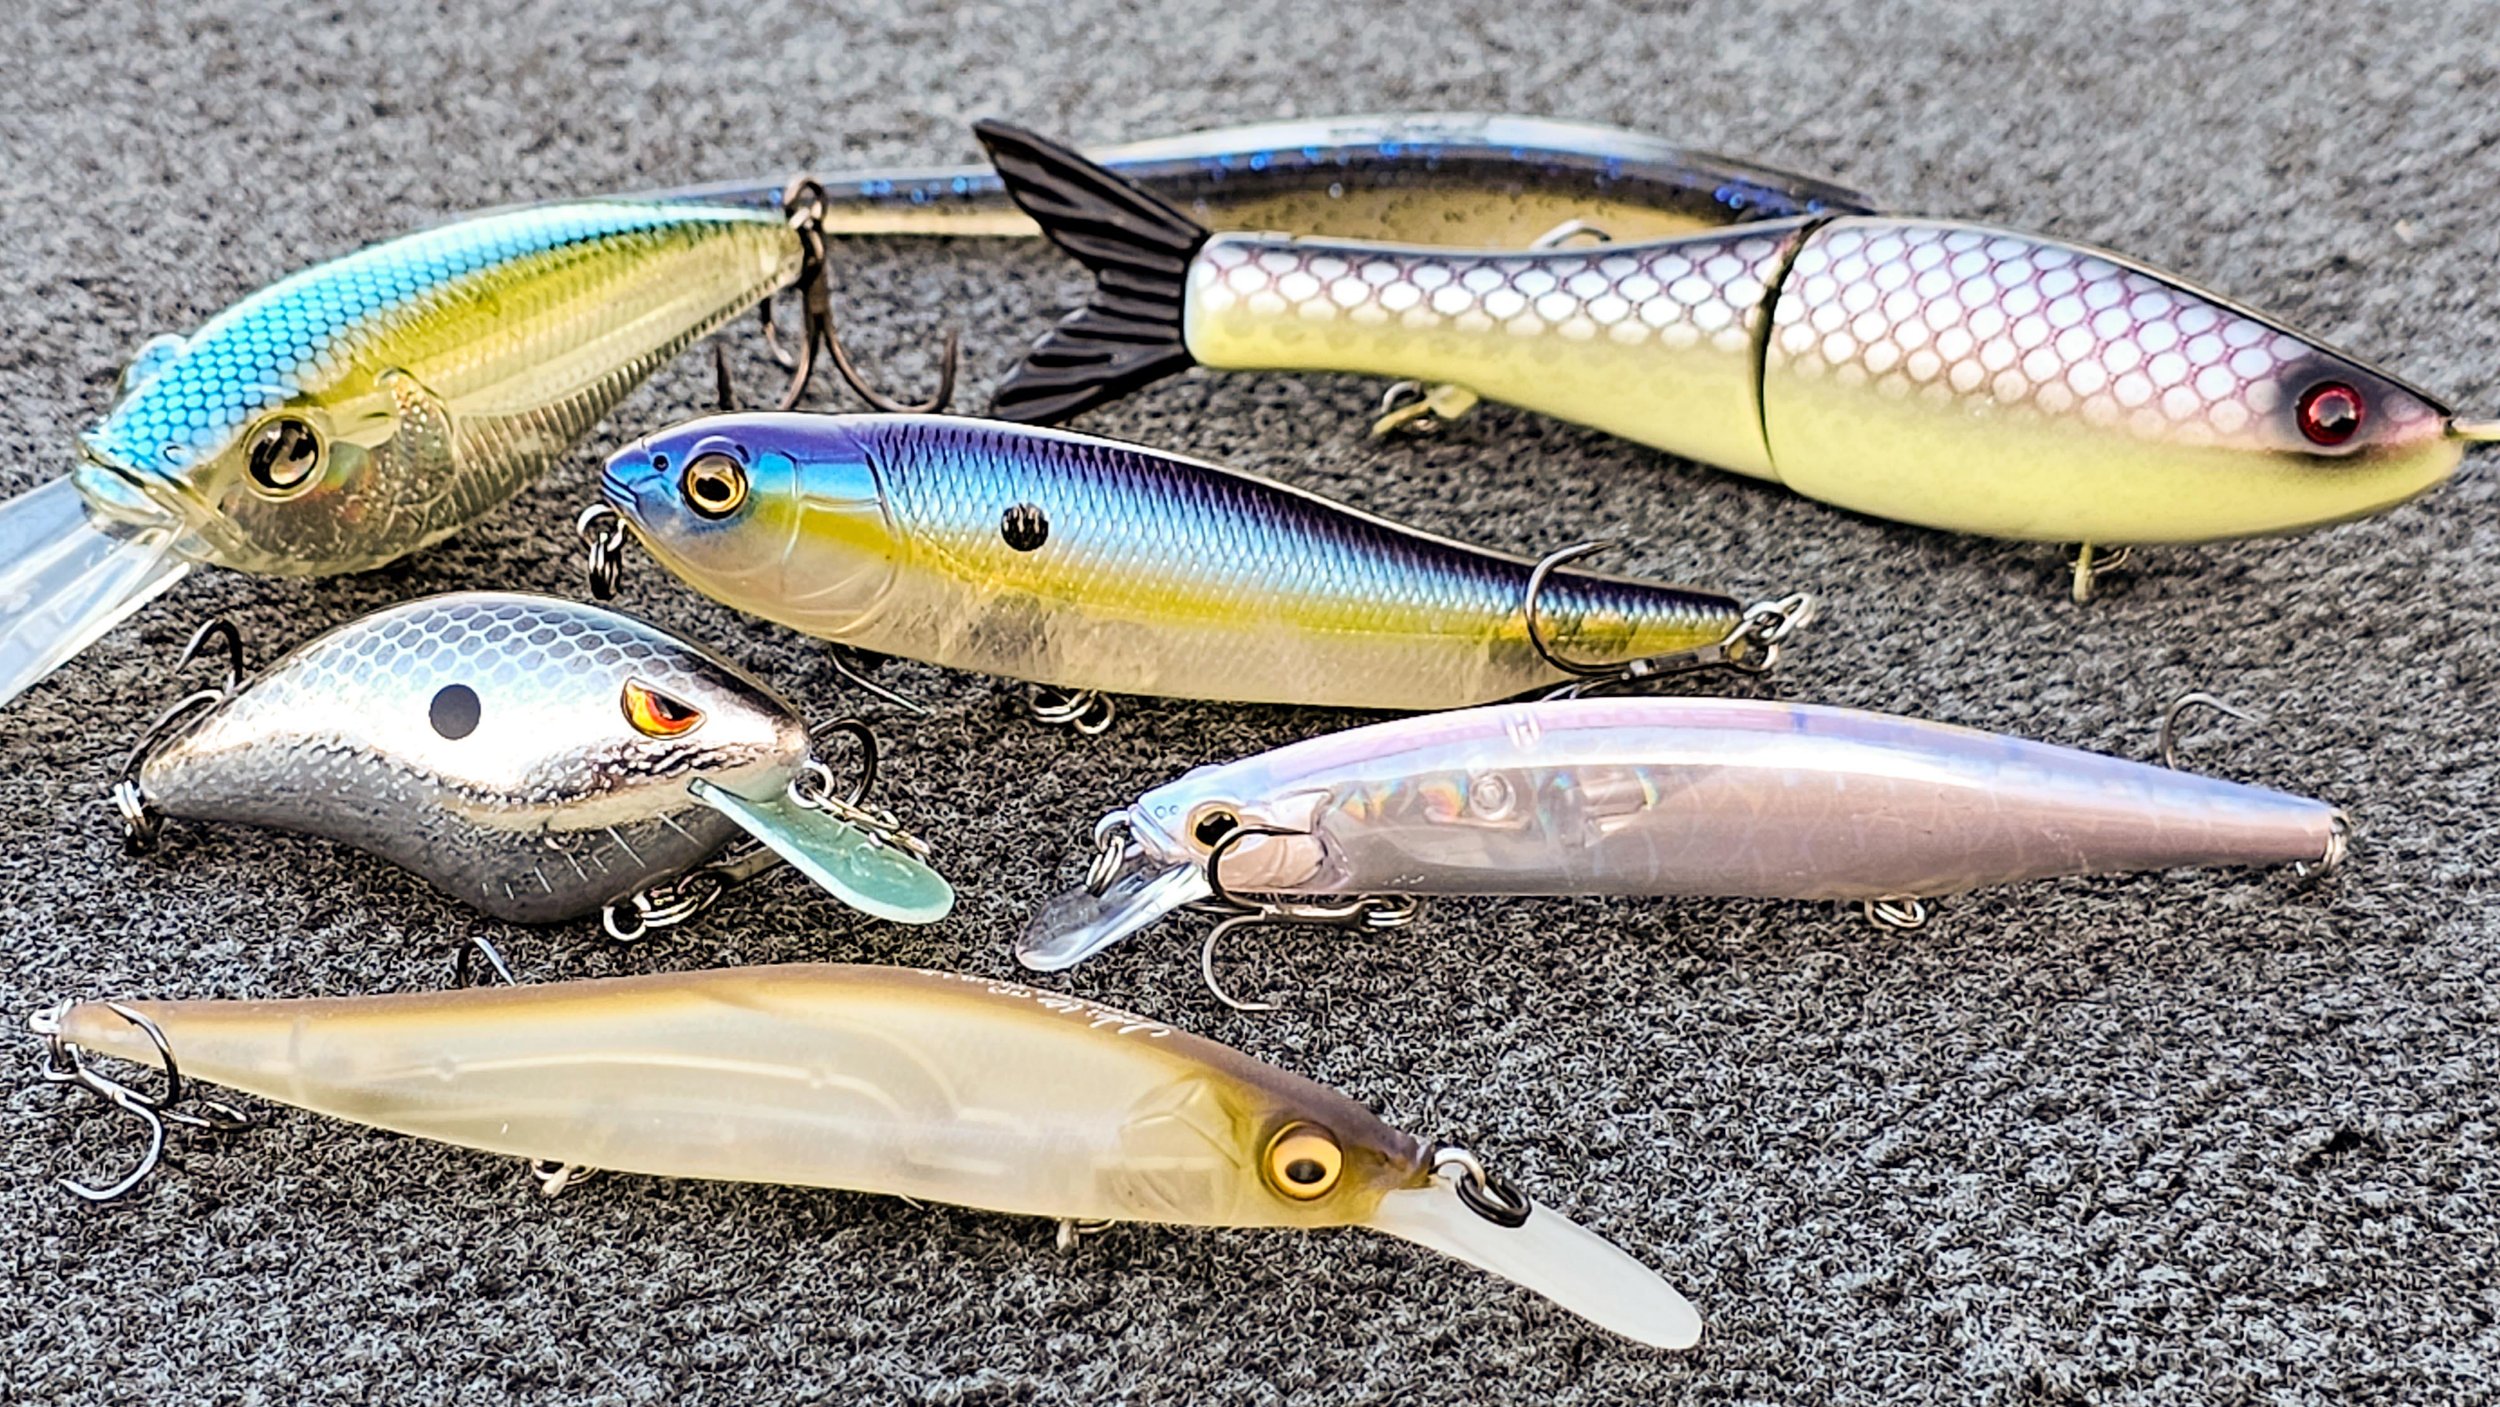 Top 5 Baits For October Bass Fishing!! — Tactical Bassin' - Bass